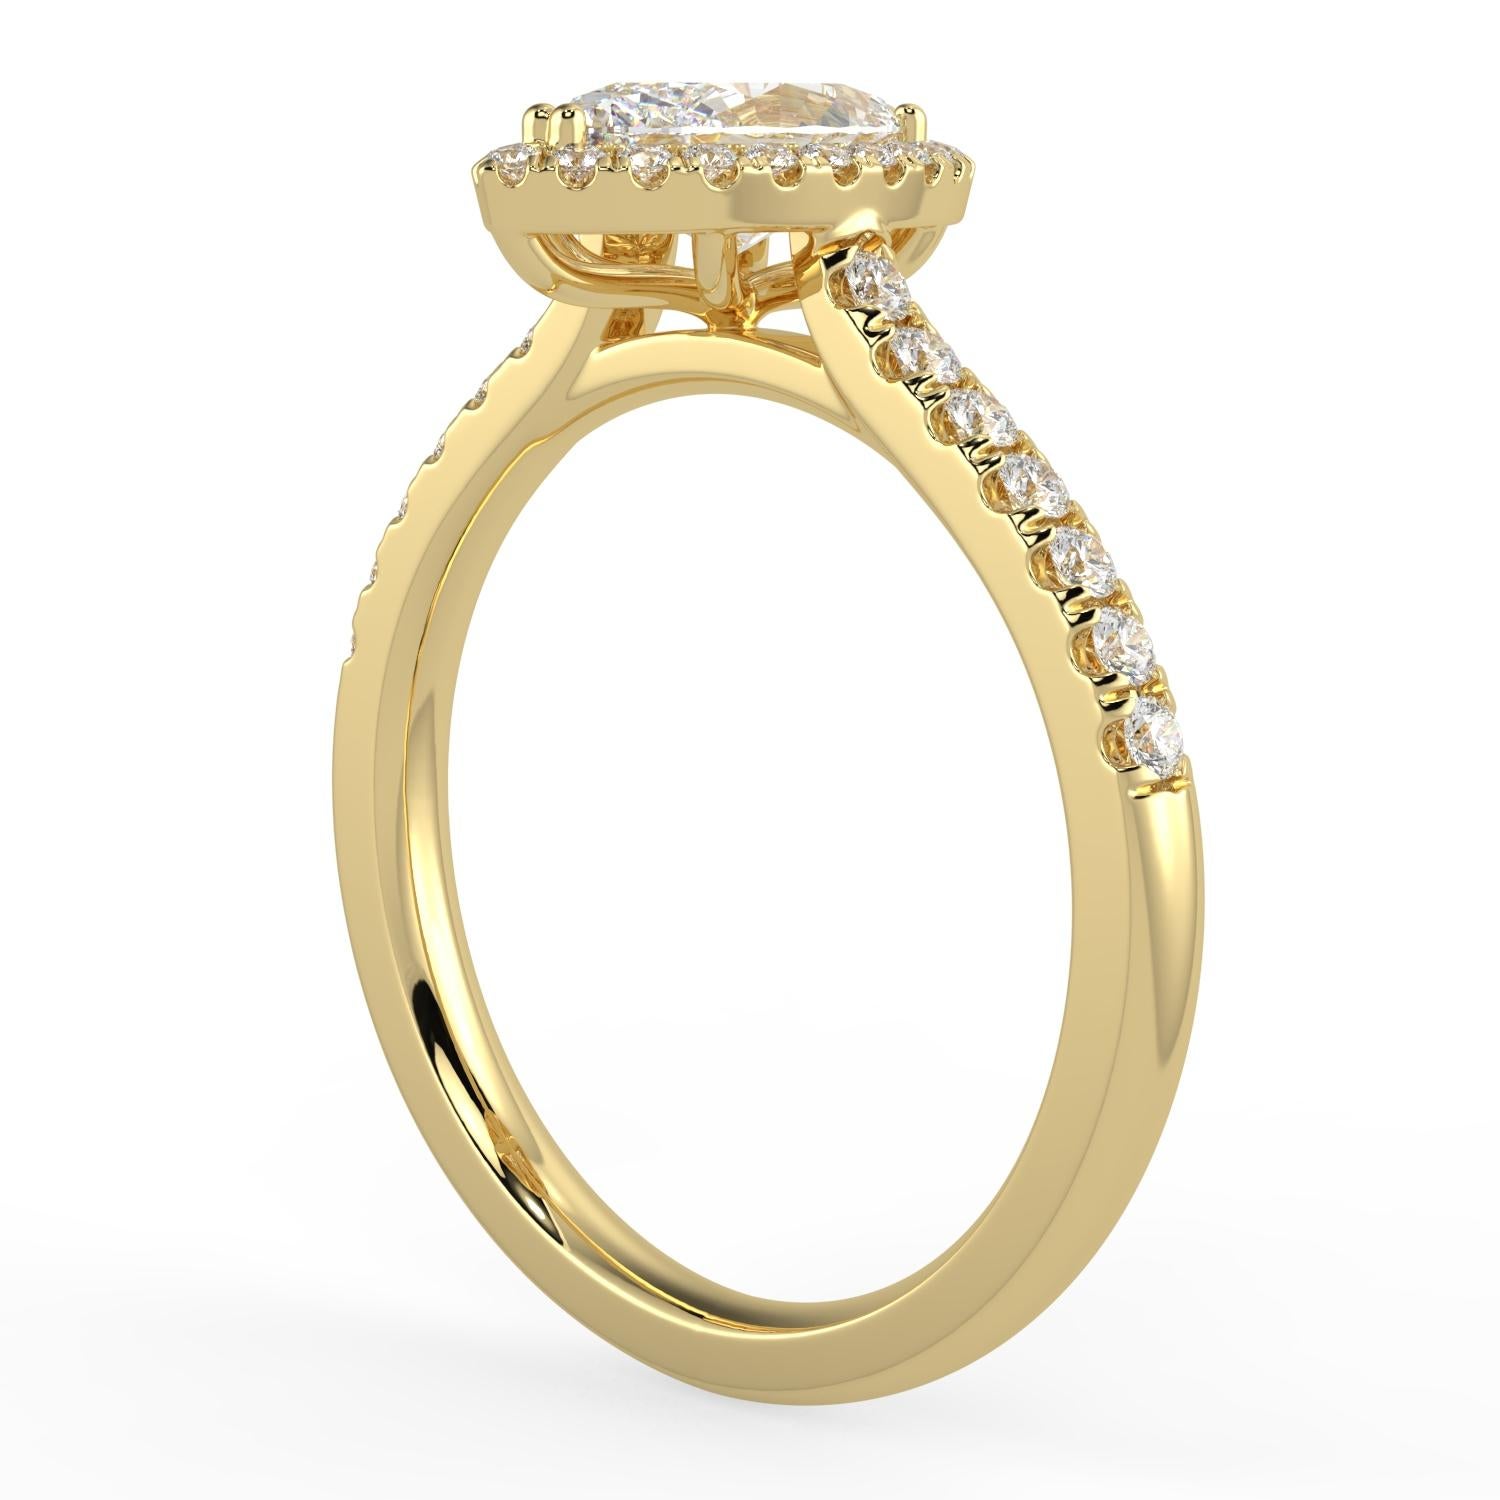 Aamiaa DIAMOND RING

1ct Natural Diamond G-H Color SI Clarity Perfect Design Shape Halo Fashion Stunning Promise Ring 14K Yellow Gold
Specification:
Brand: Aamiaa
Metal: Yellow Gold
Metal Purity: 14k
Center Diamond Shape: Marquise
Design: